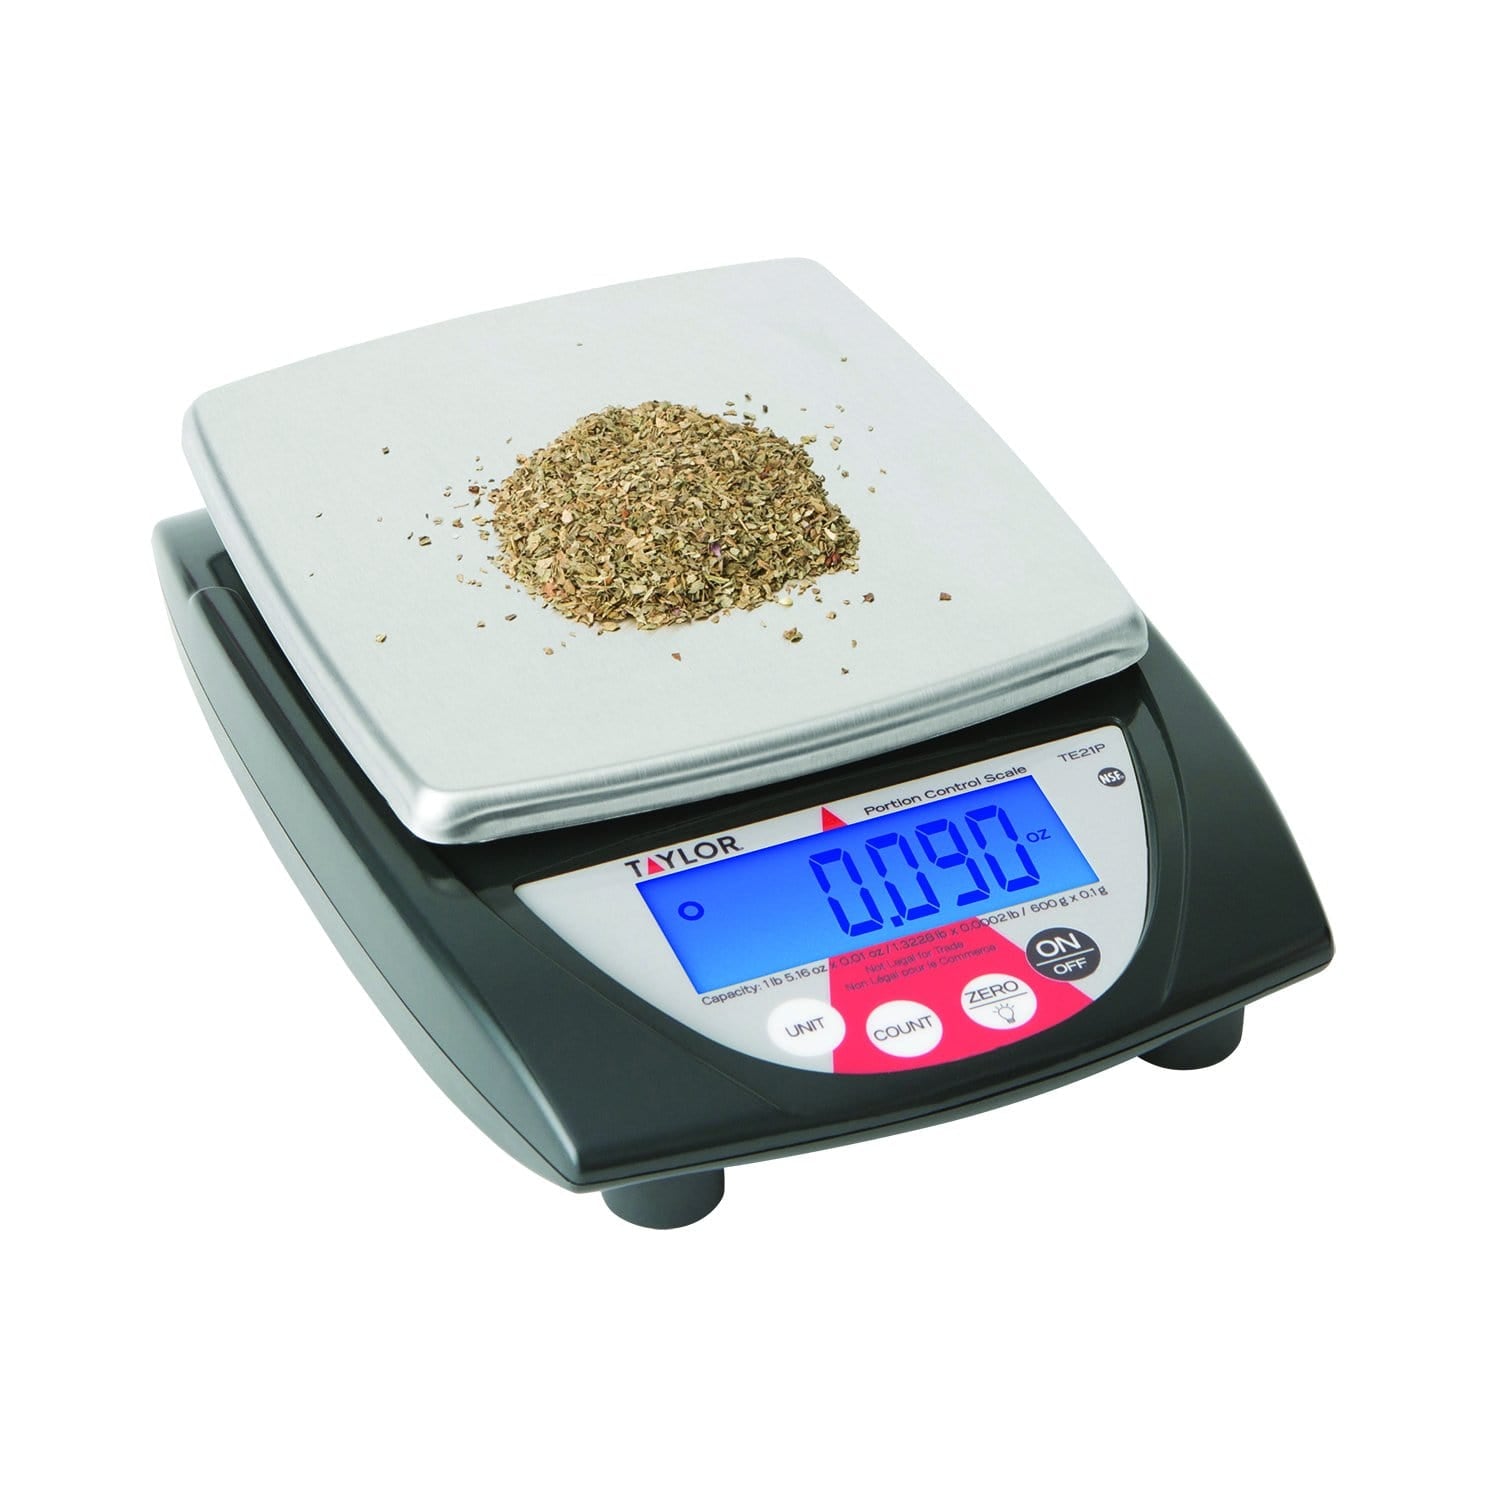 Measuring Tools & Scales - Up to 60% Discount - Free Delivery